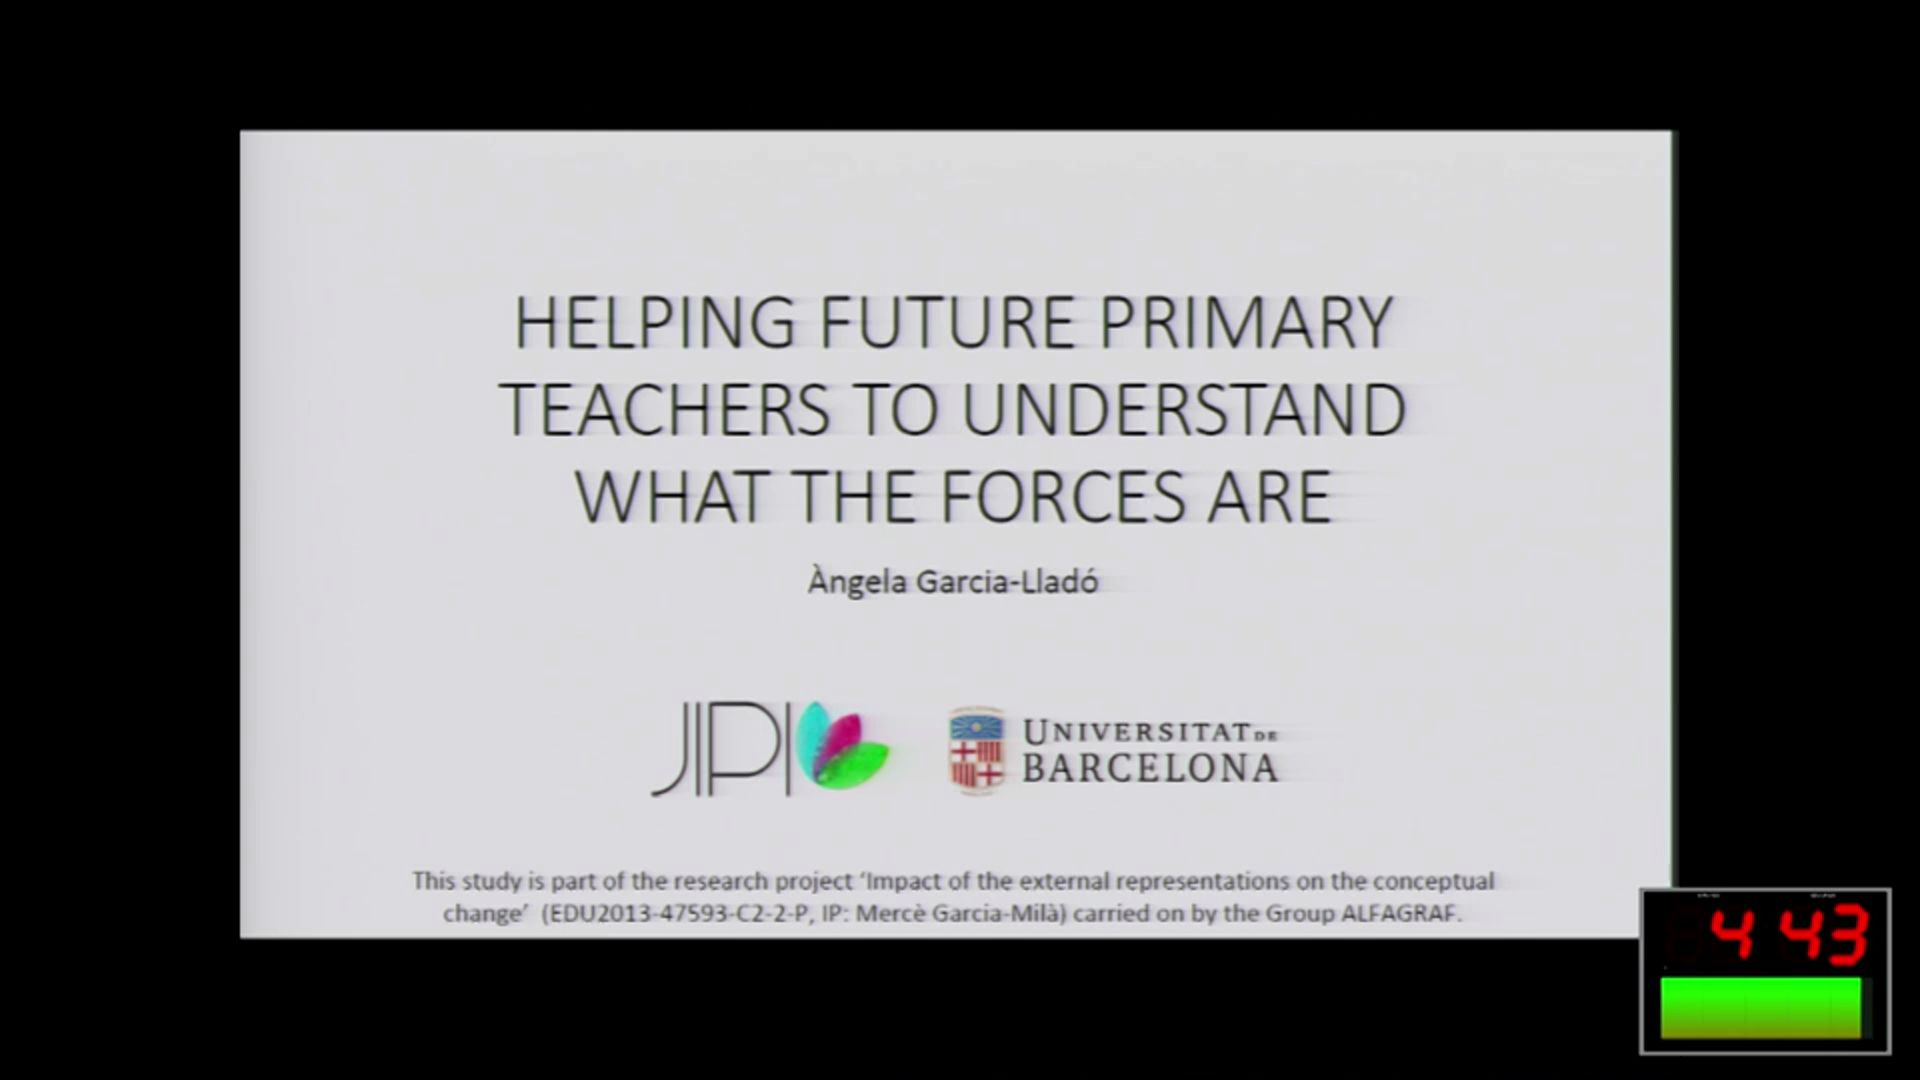 Helping future primary teachers to understand what the forces are